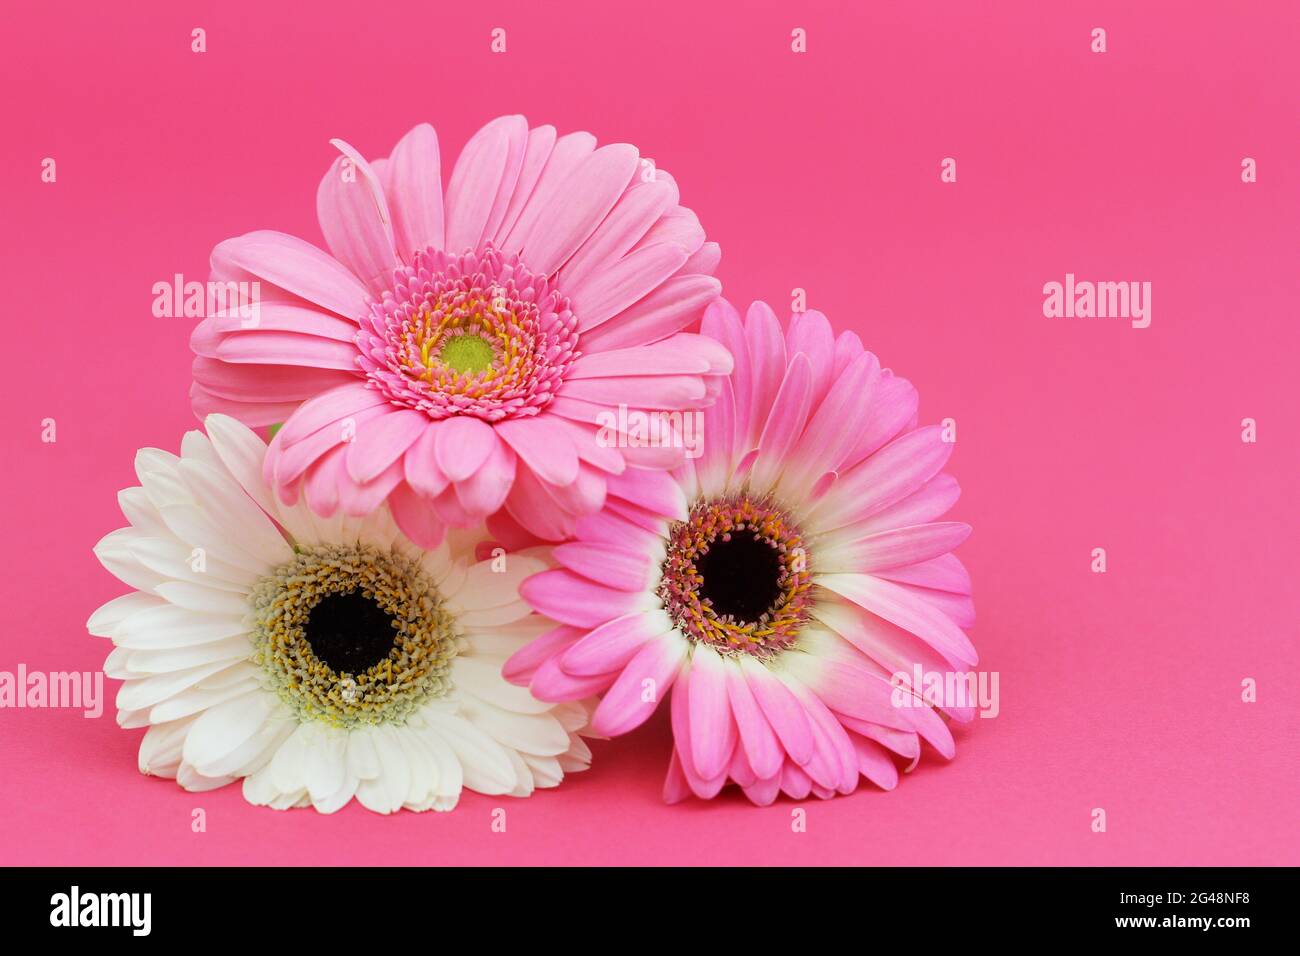 Three beautiful pink and white gerbera daisies on vivid pink background with copy space Stock Photo